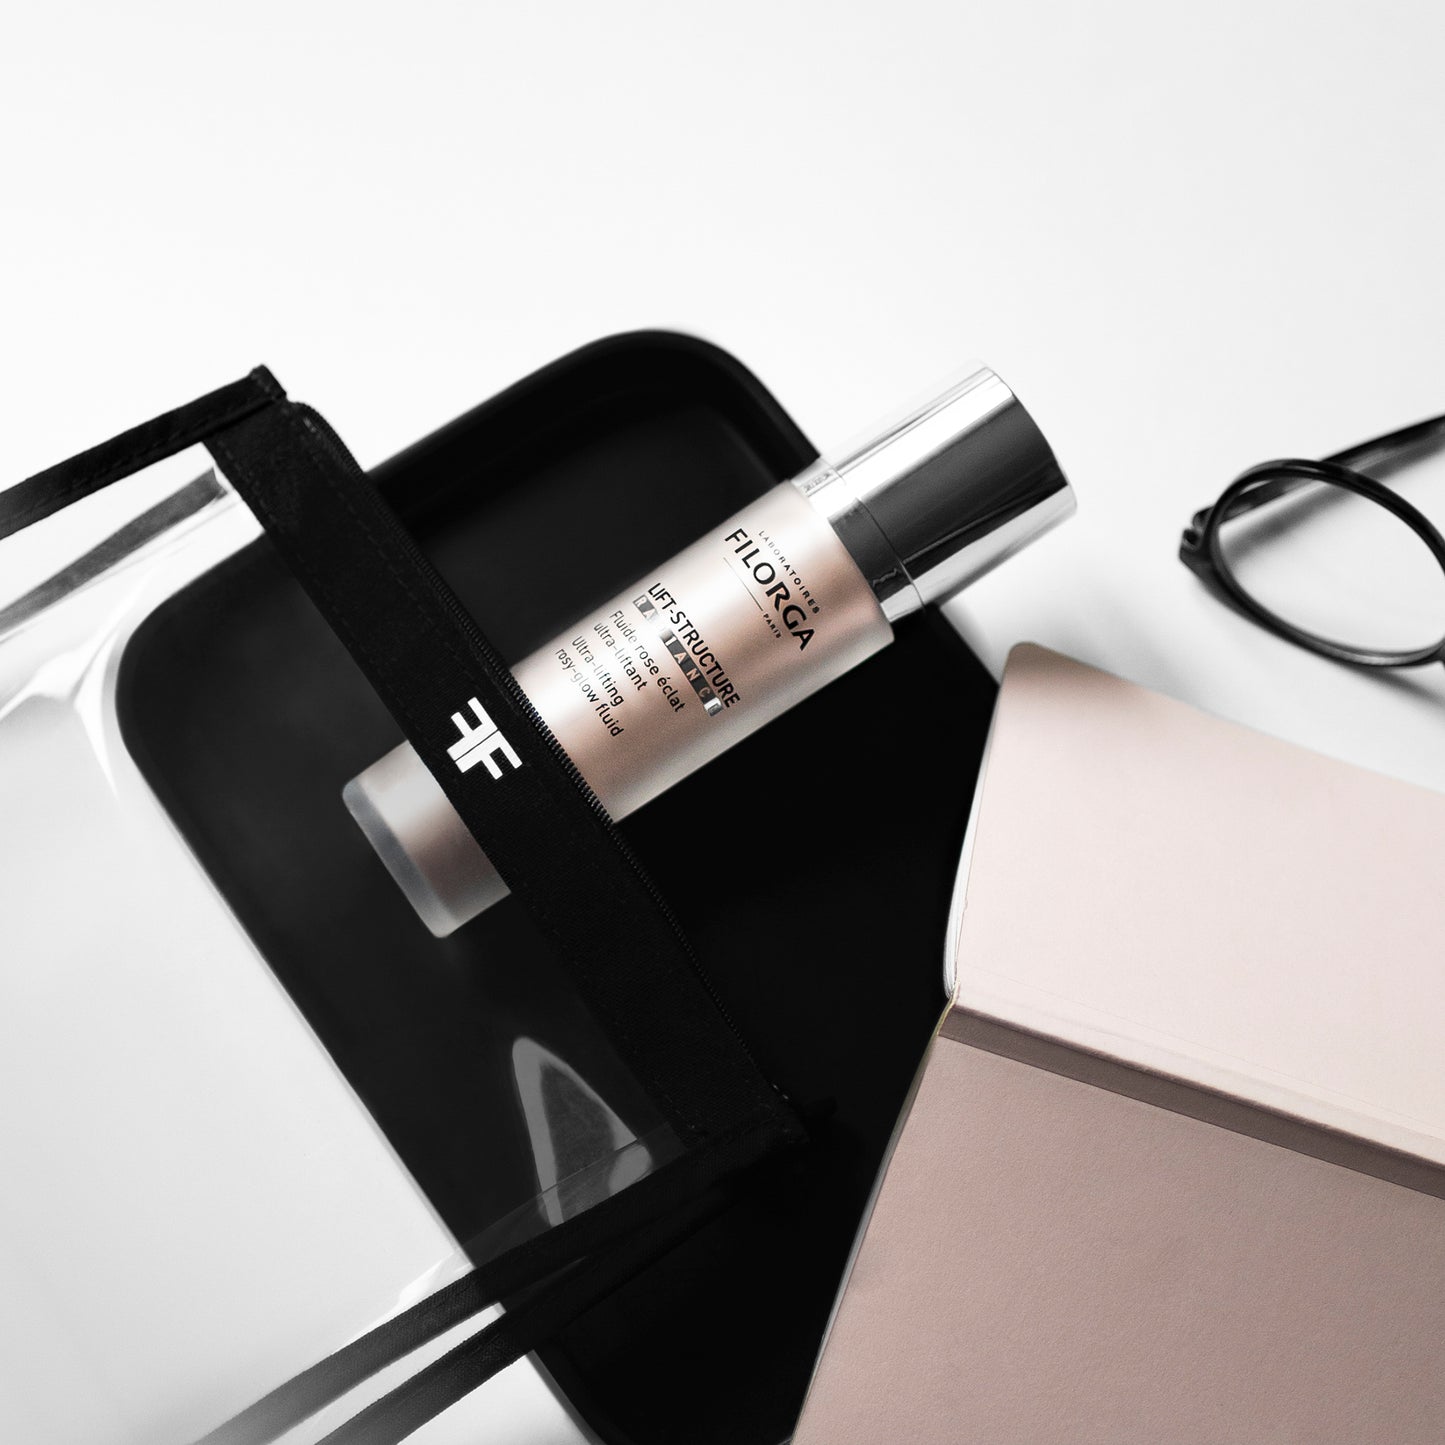 FILORGA LIFT-STRUCTURE RADIANCE bottle diagonally placed on a table near glasses and a FF FILORGA clear pouch